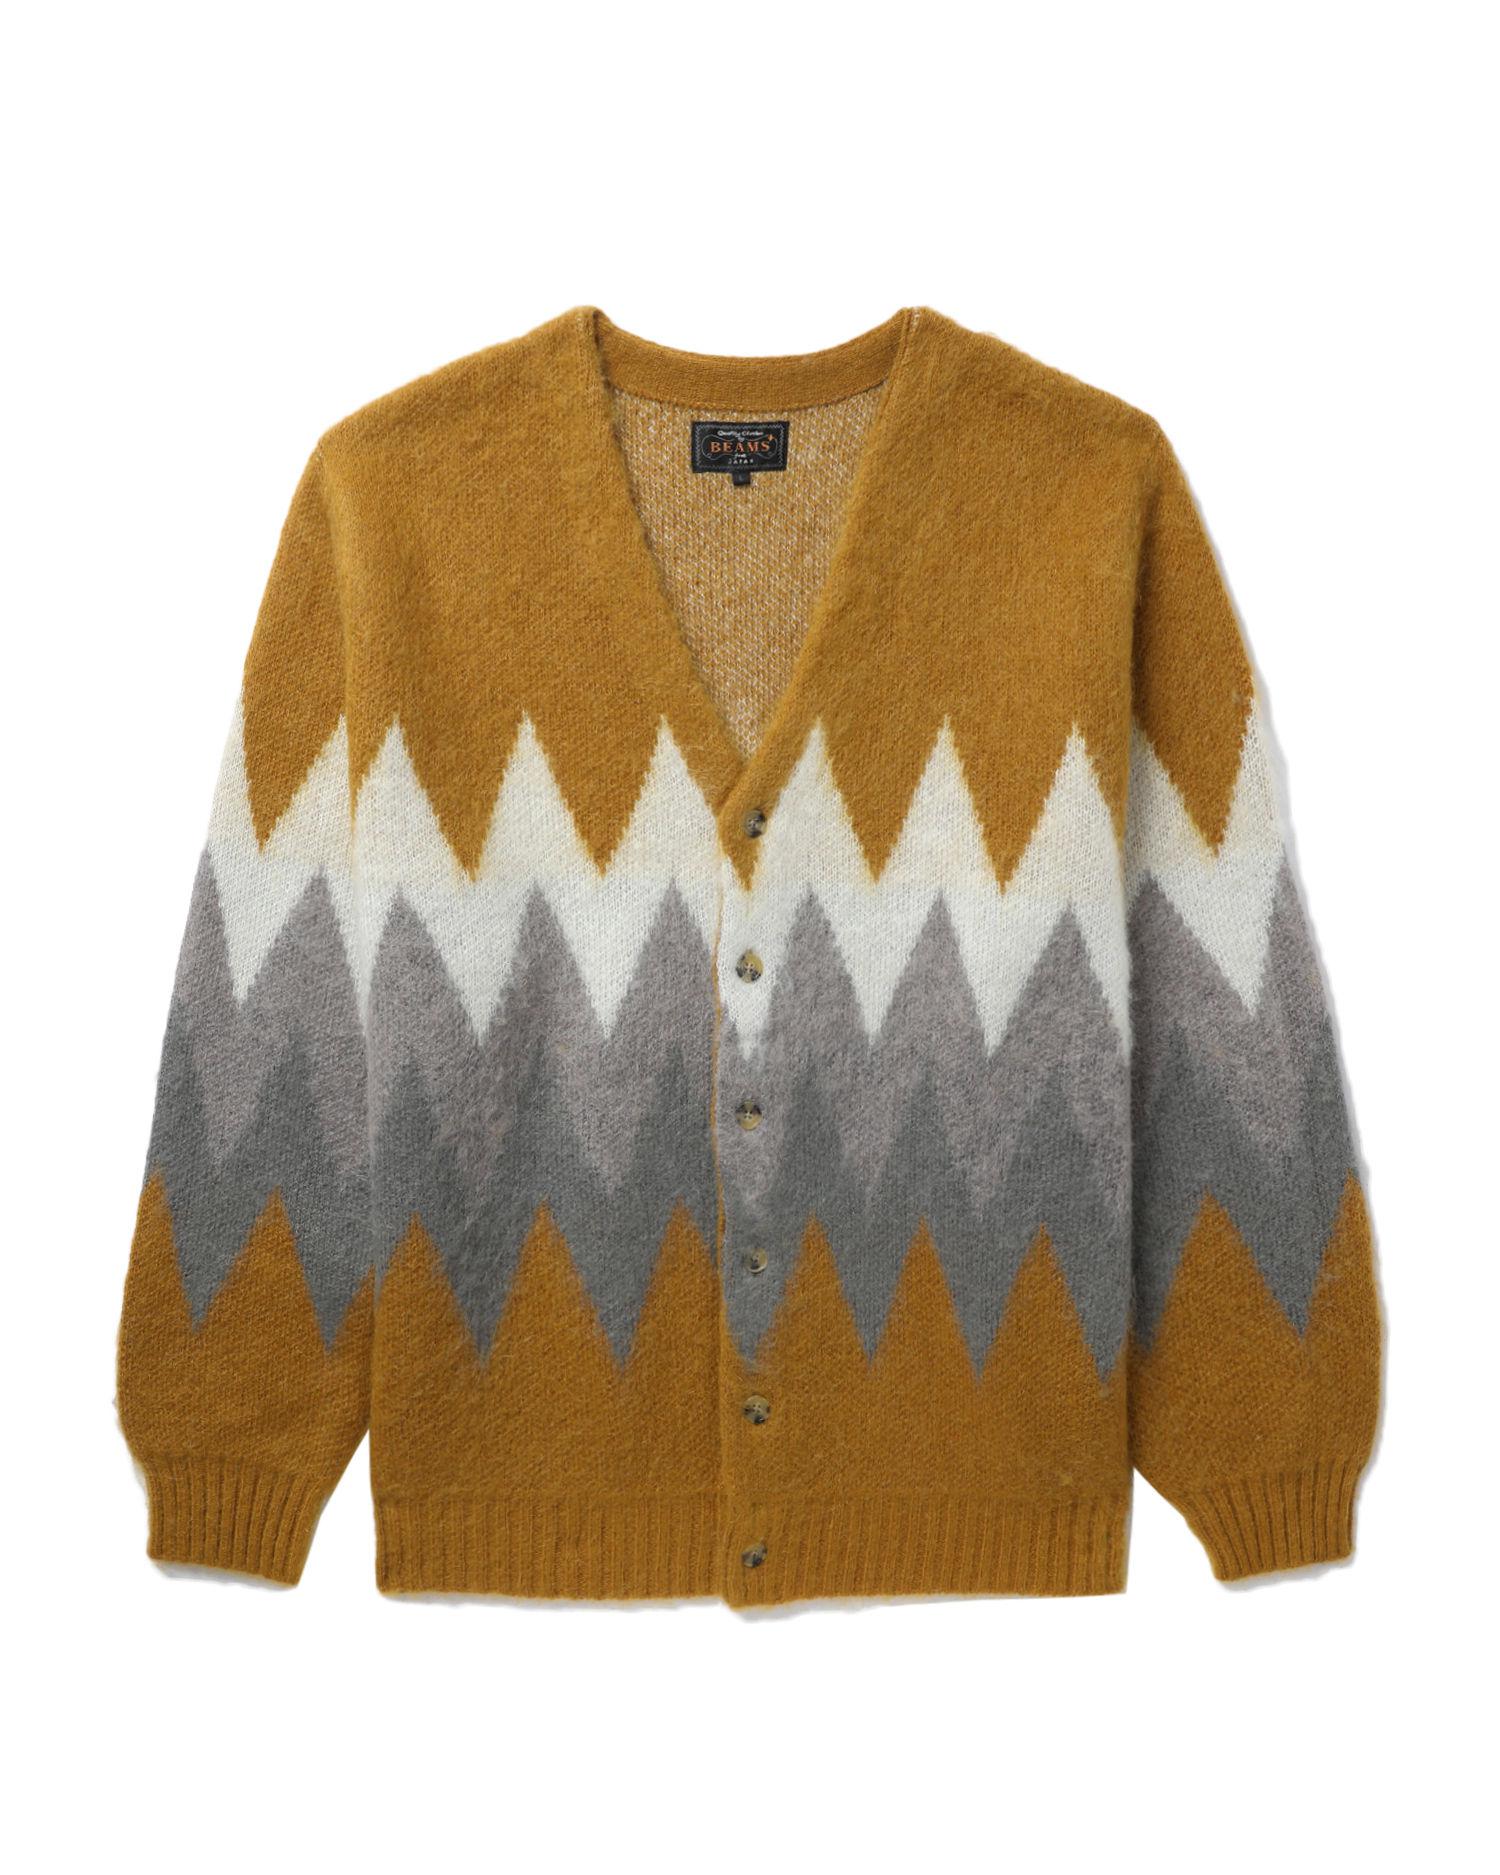 Graphic knit relaxed cardigan by BEAMS PLUS